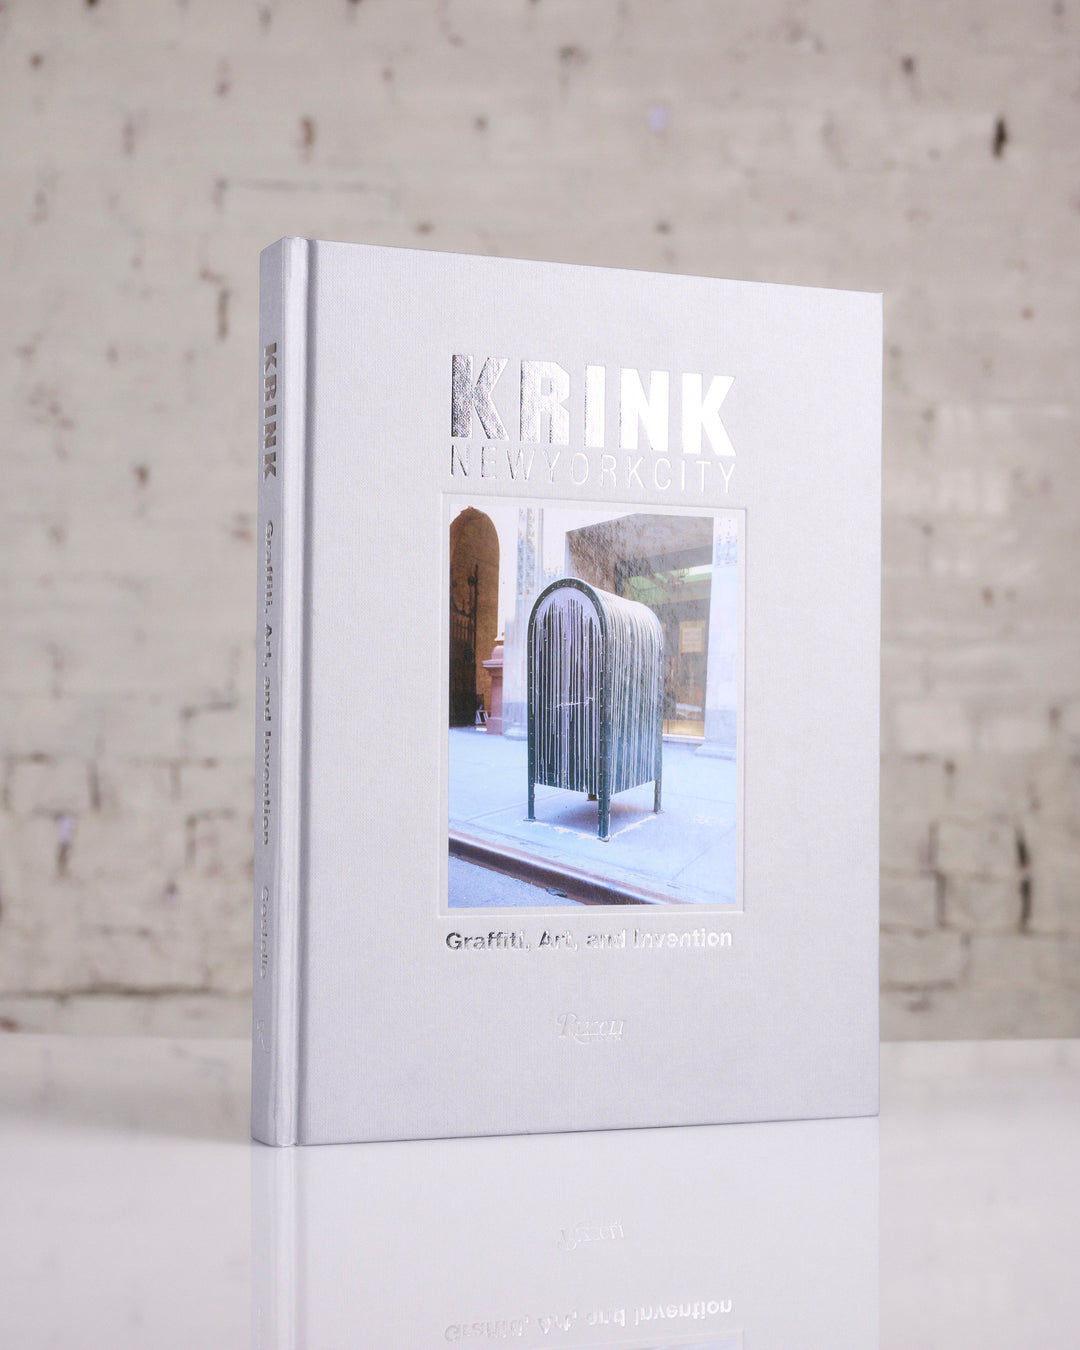 Krink New York City: Graffiti, Art, and Invention Book